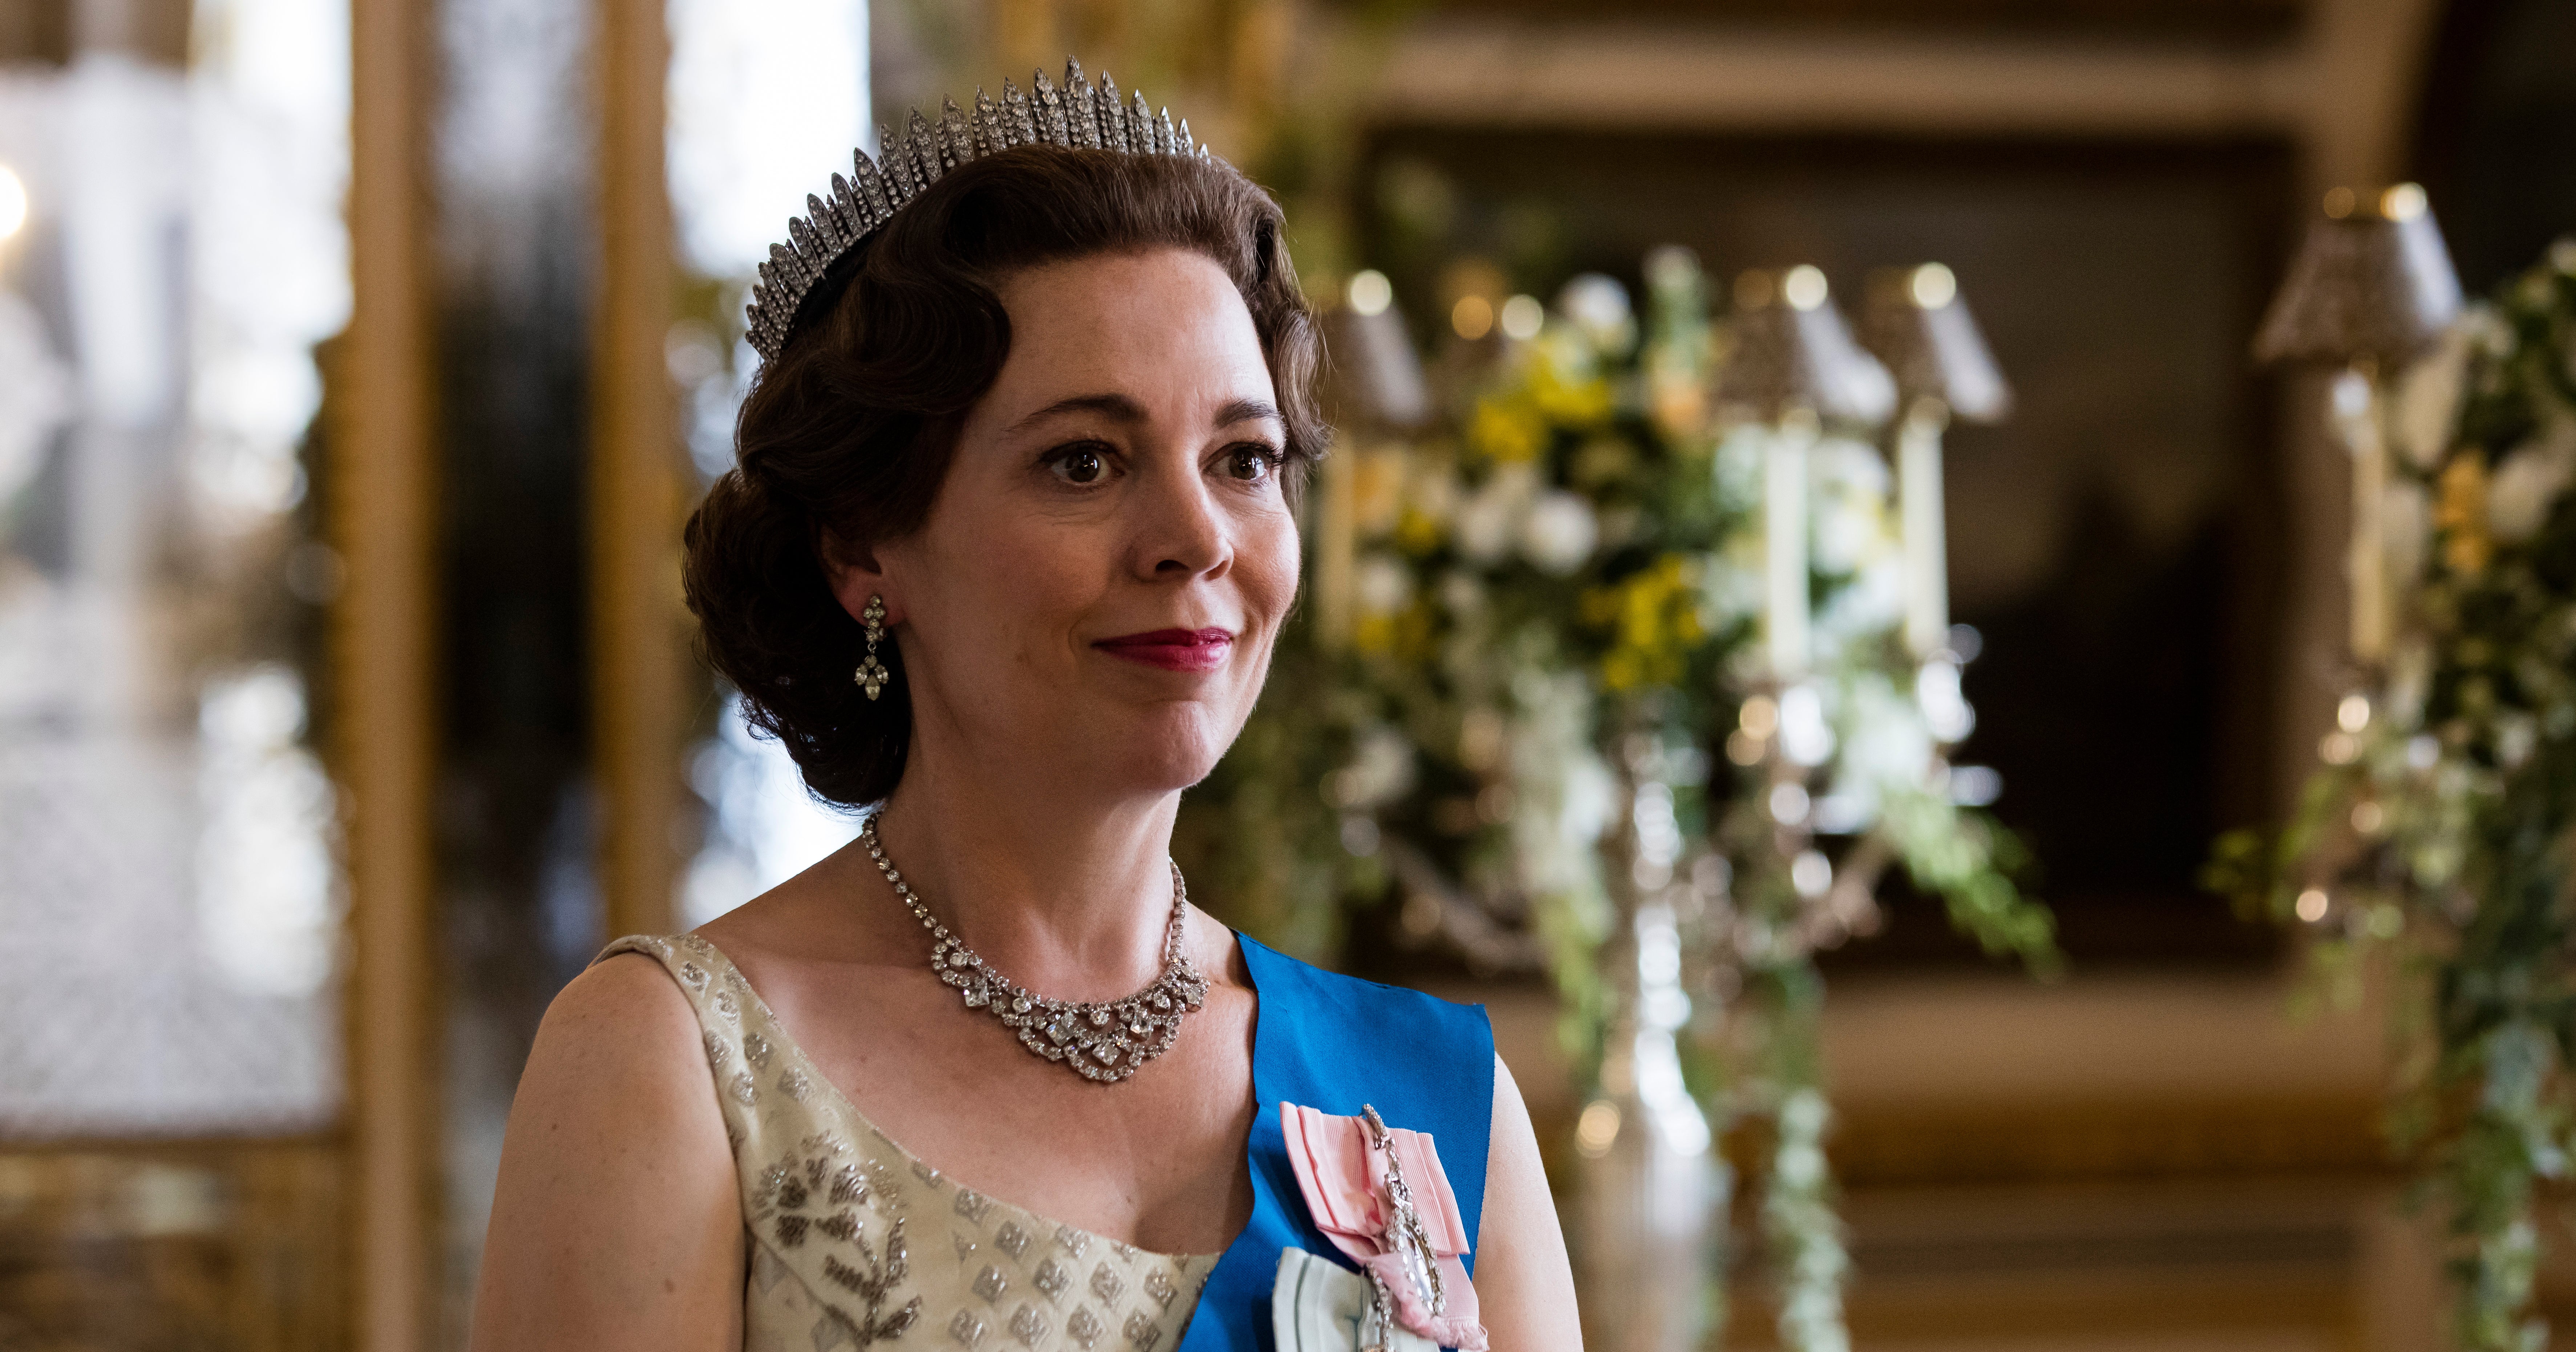 The Crown Season 4 Questions Answered Cast, Date, Plot